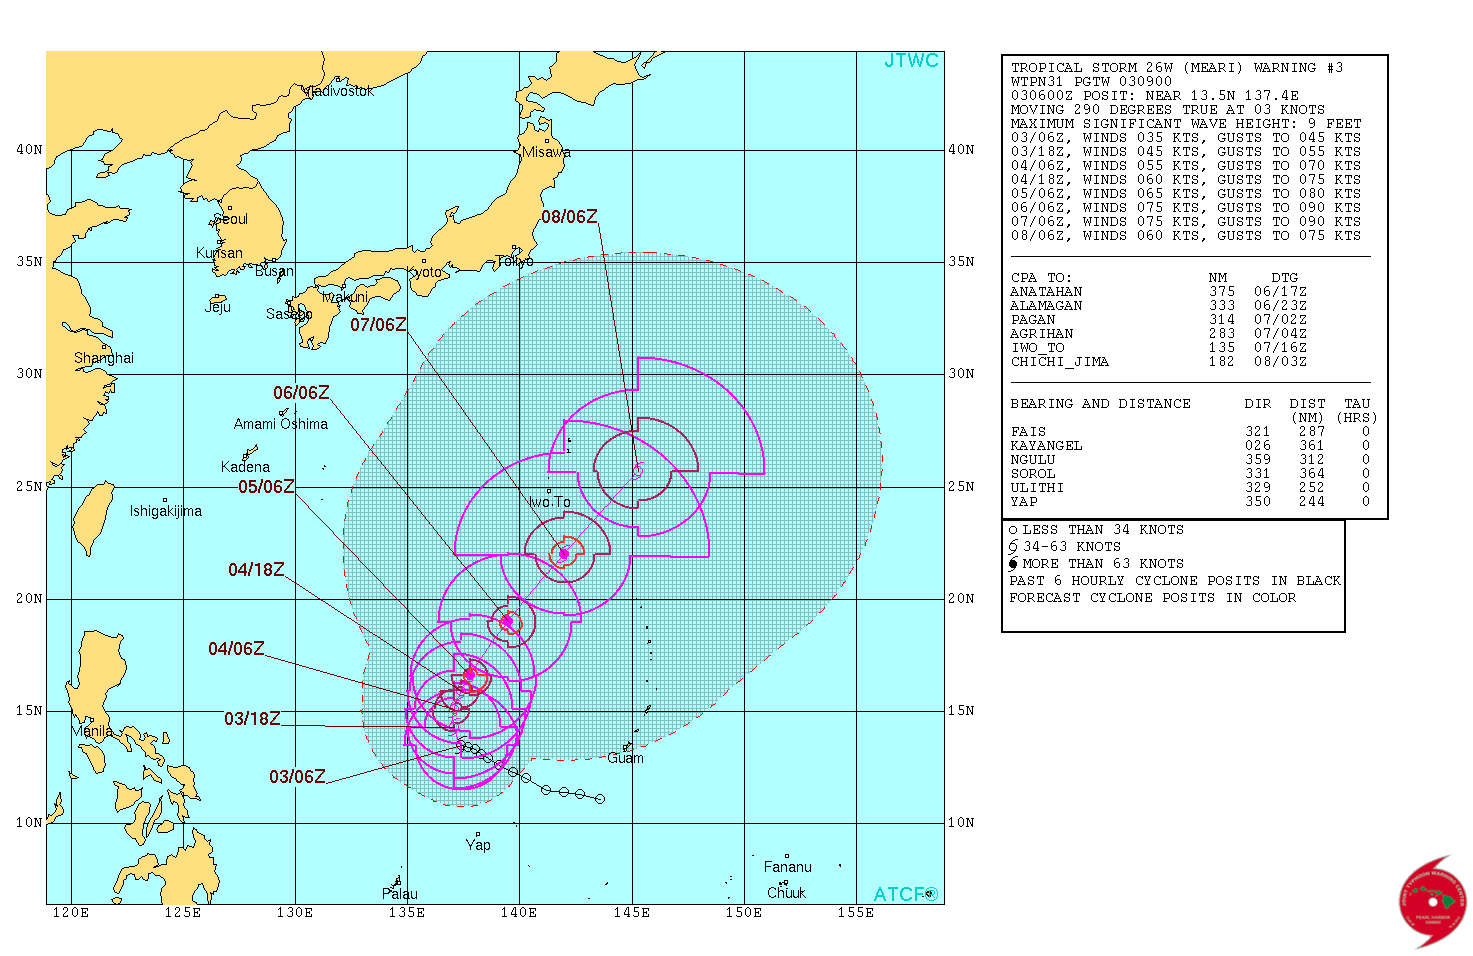 Tropical Storm Meari 5-day forecast track. Image credit: JTWC